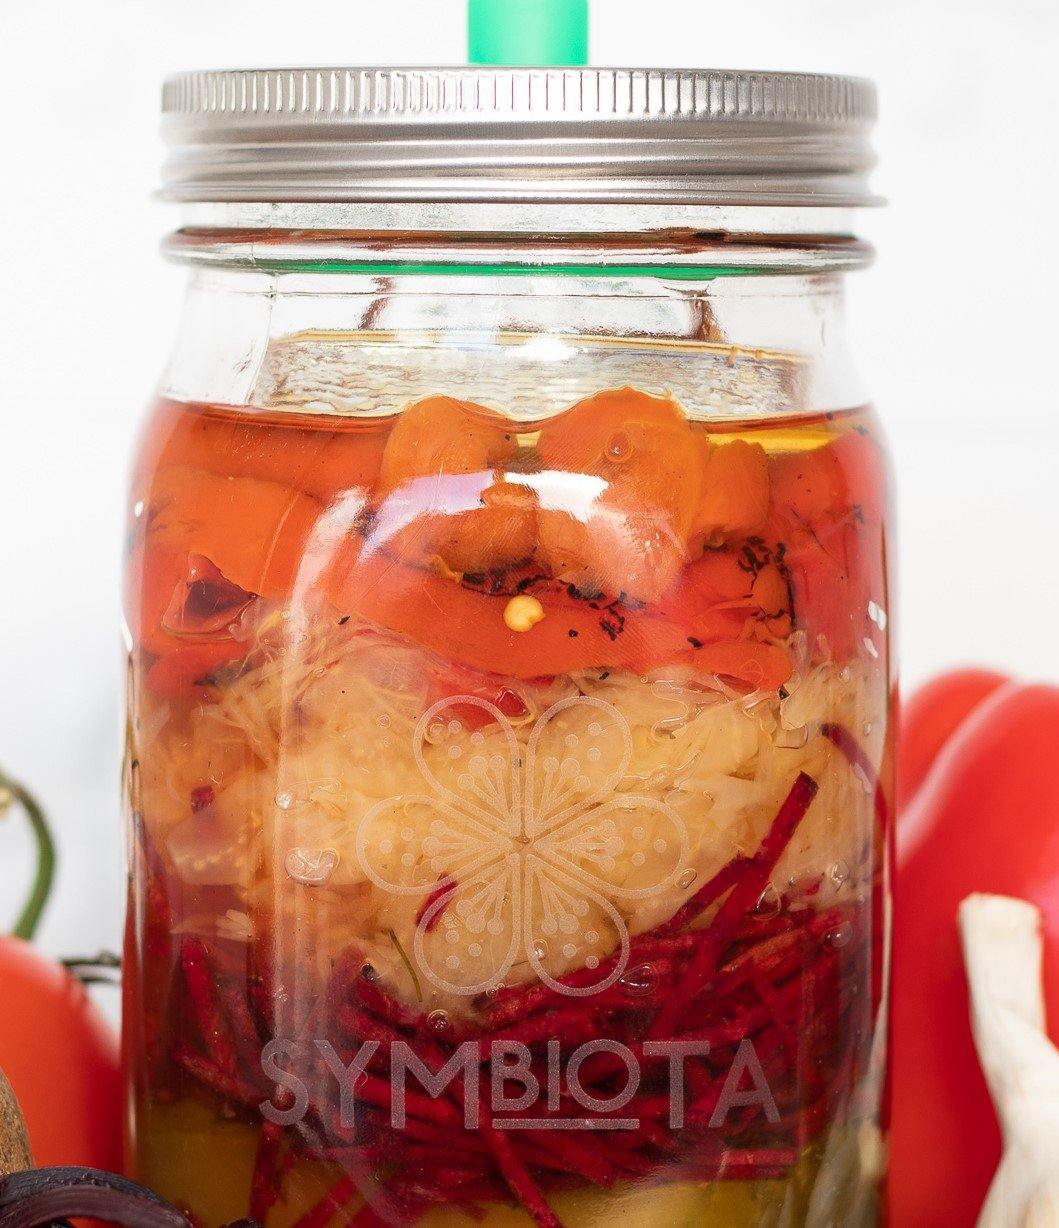 Symbiota Glass weight for fermentation jar (Buy 3 & we'll send a fourth FREE) - All Things Fermented | Home Brew Shop NZ | Supplies | Equipment